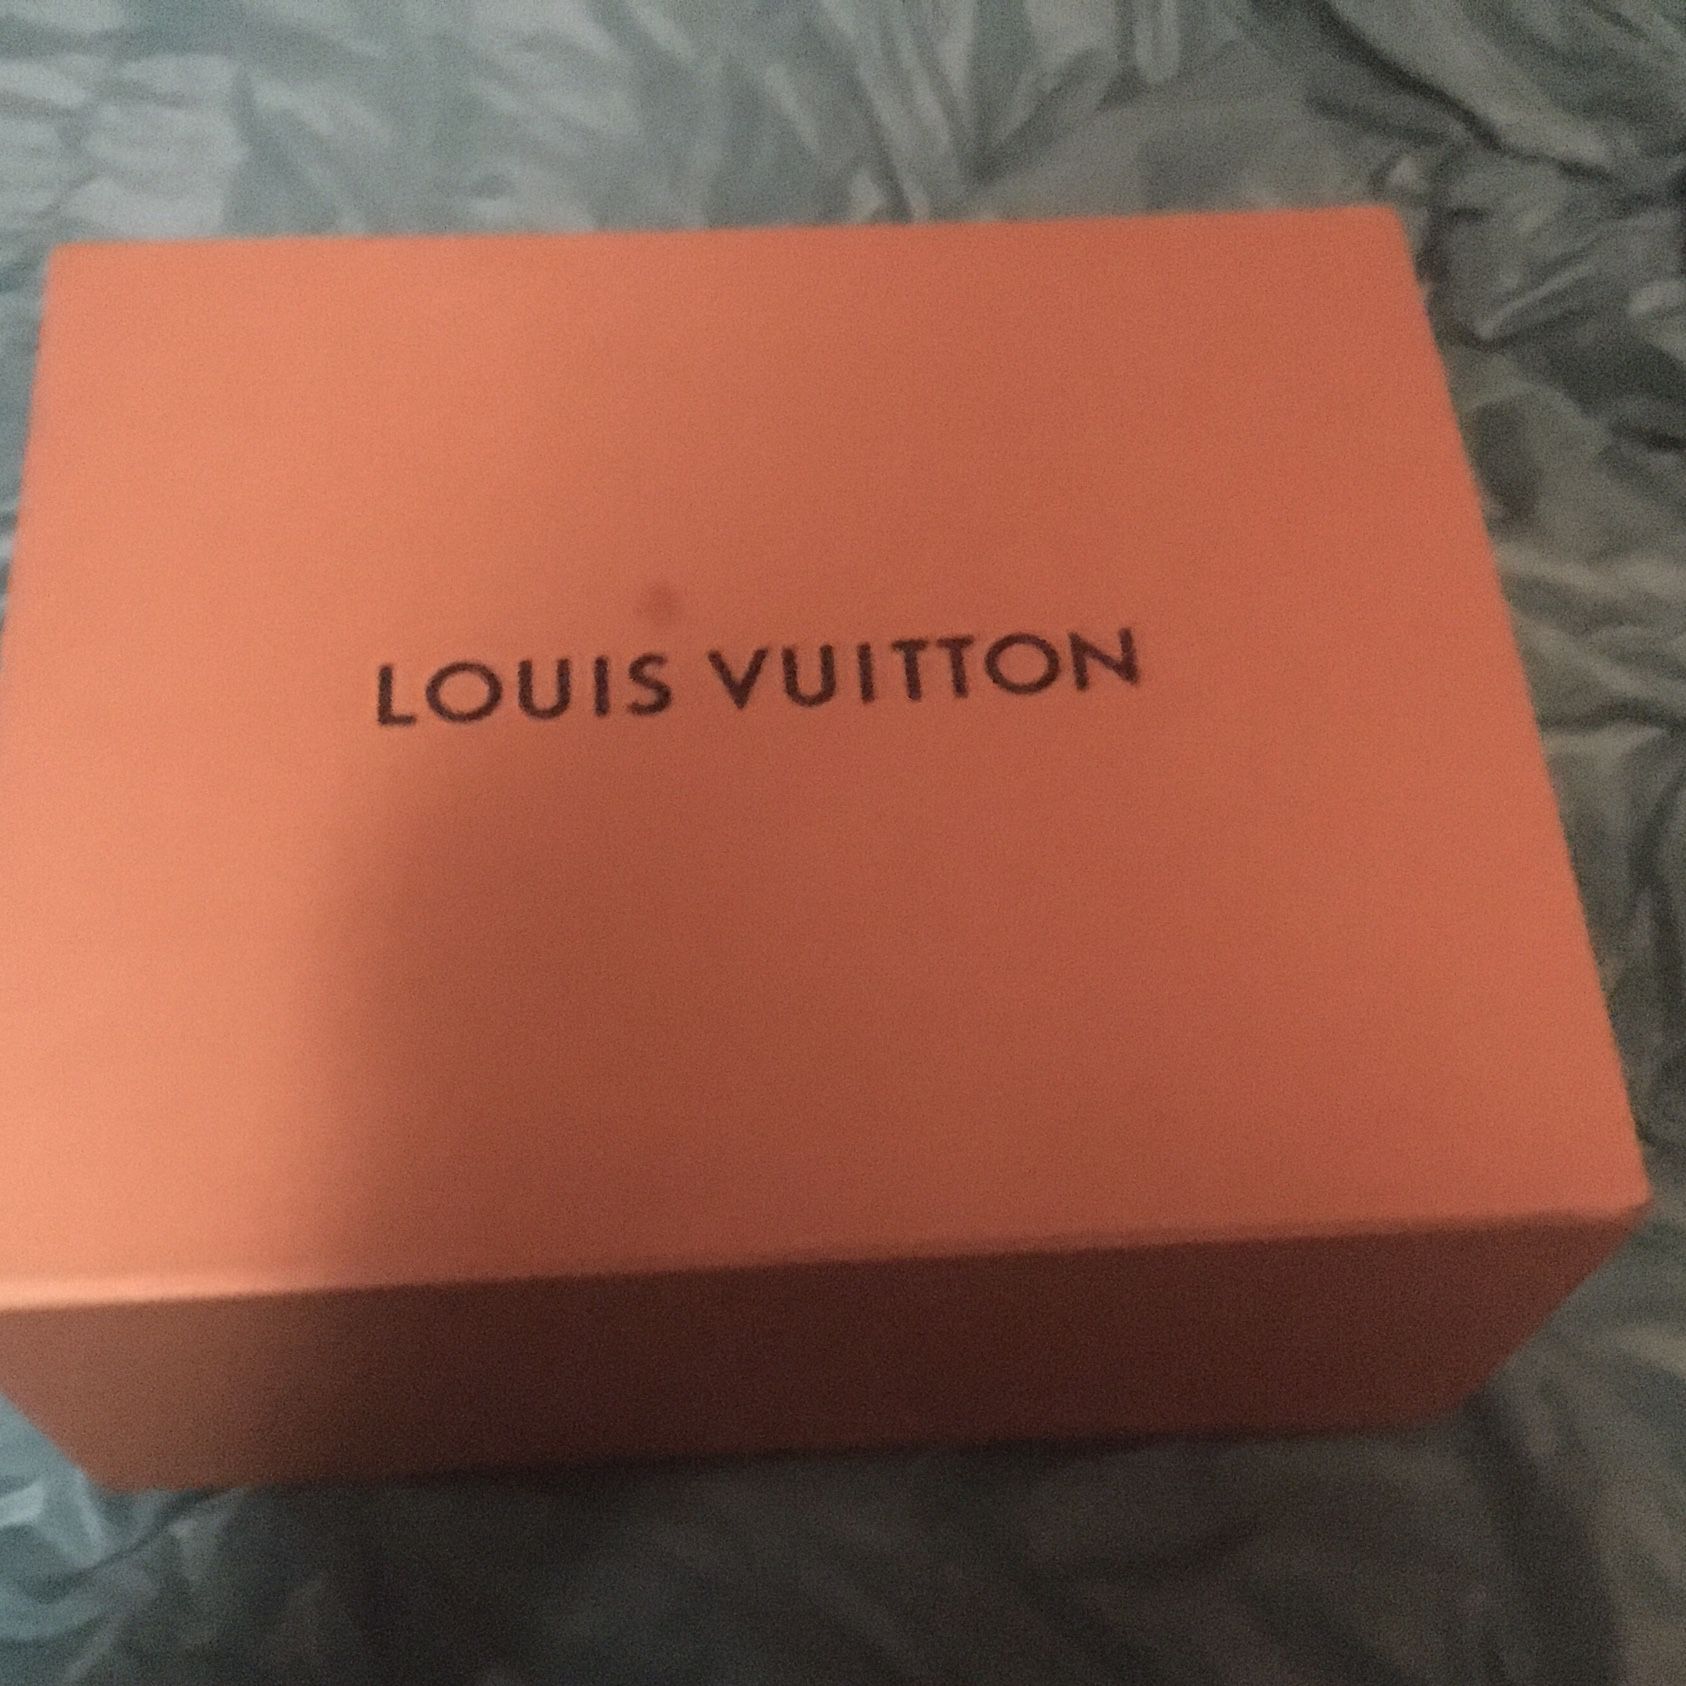 Louis Vuitton shoe box With Magnetic Flap for Sale in Oakland, CA